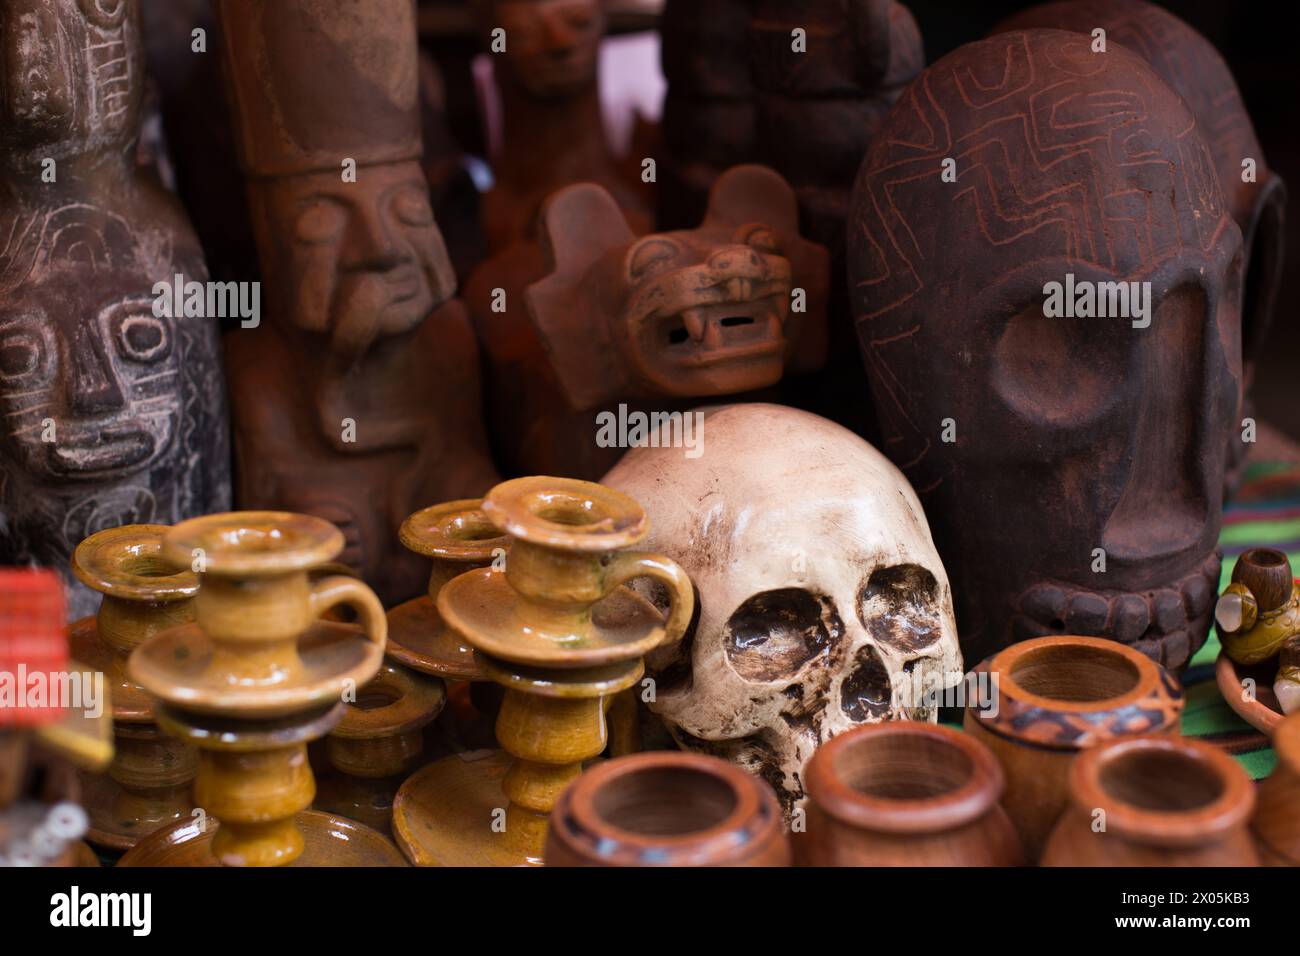 Artisan crafts, lamb foetuses, minerals, remedies and other magical and superstitious things for sale at the Witches Market in La Paz Bolivia Stock Photo